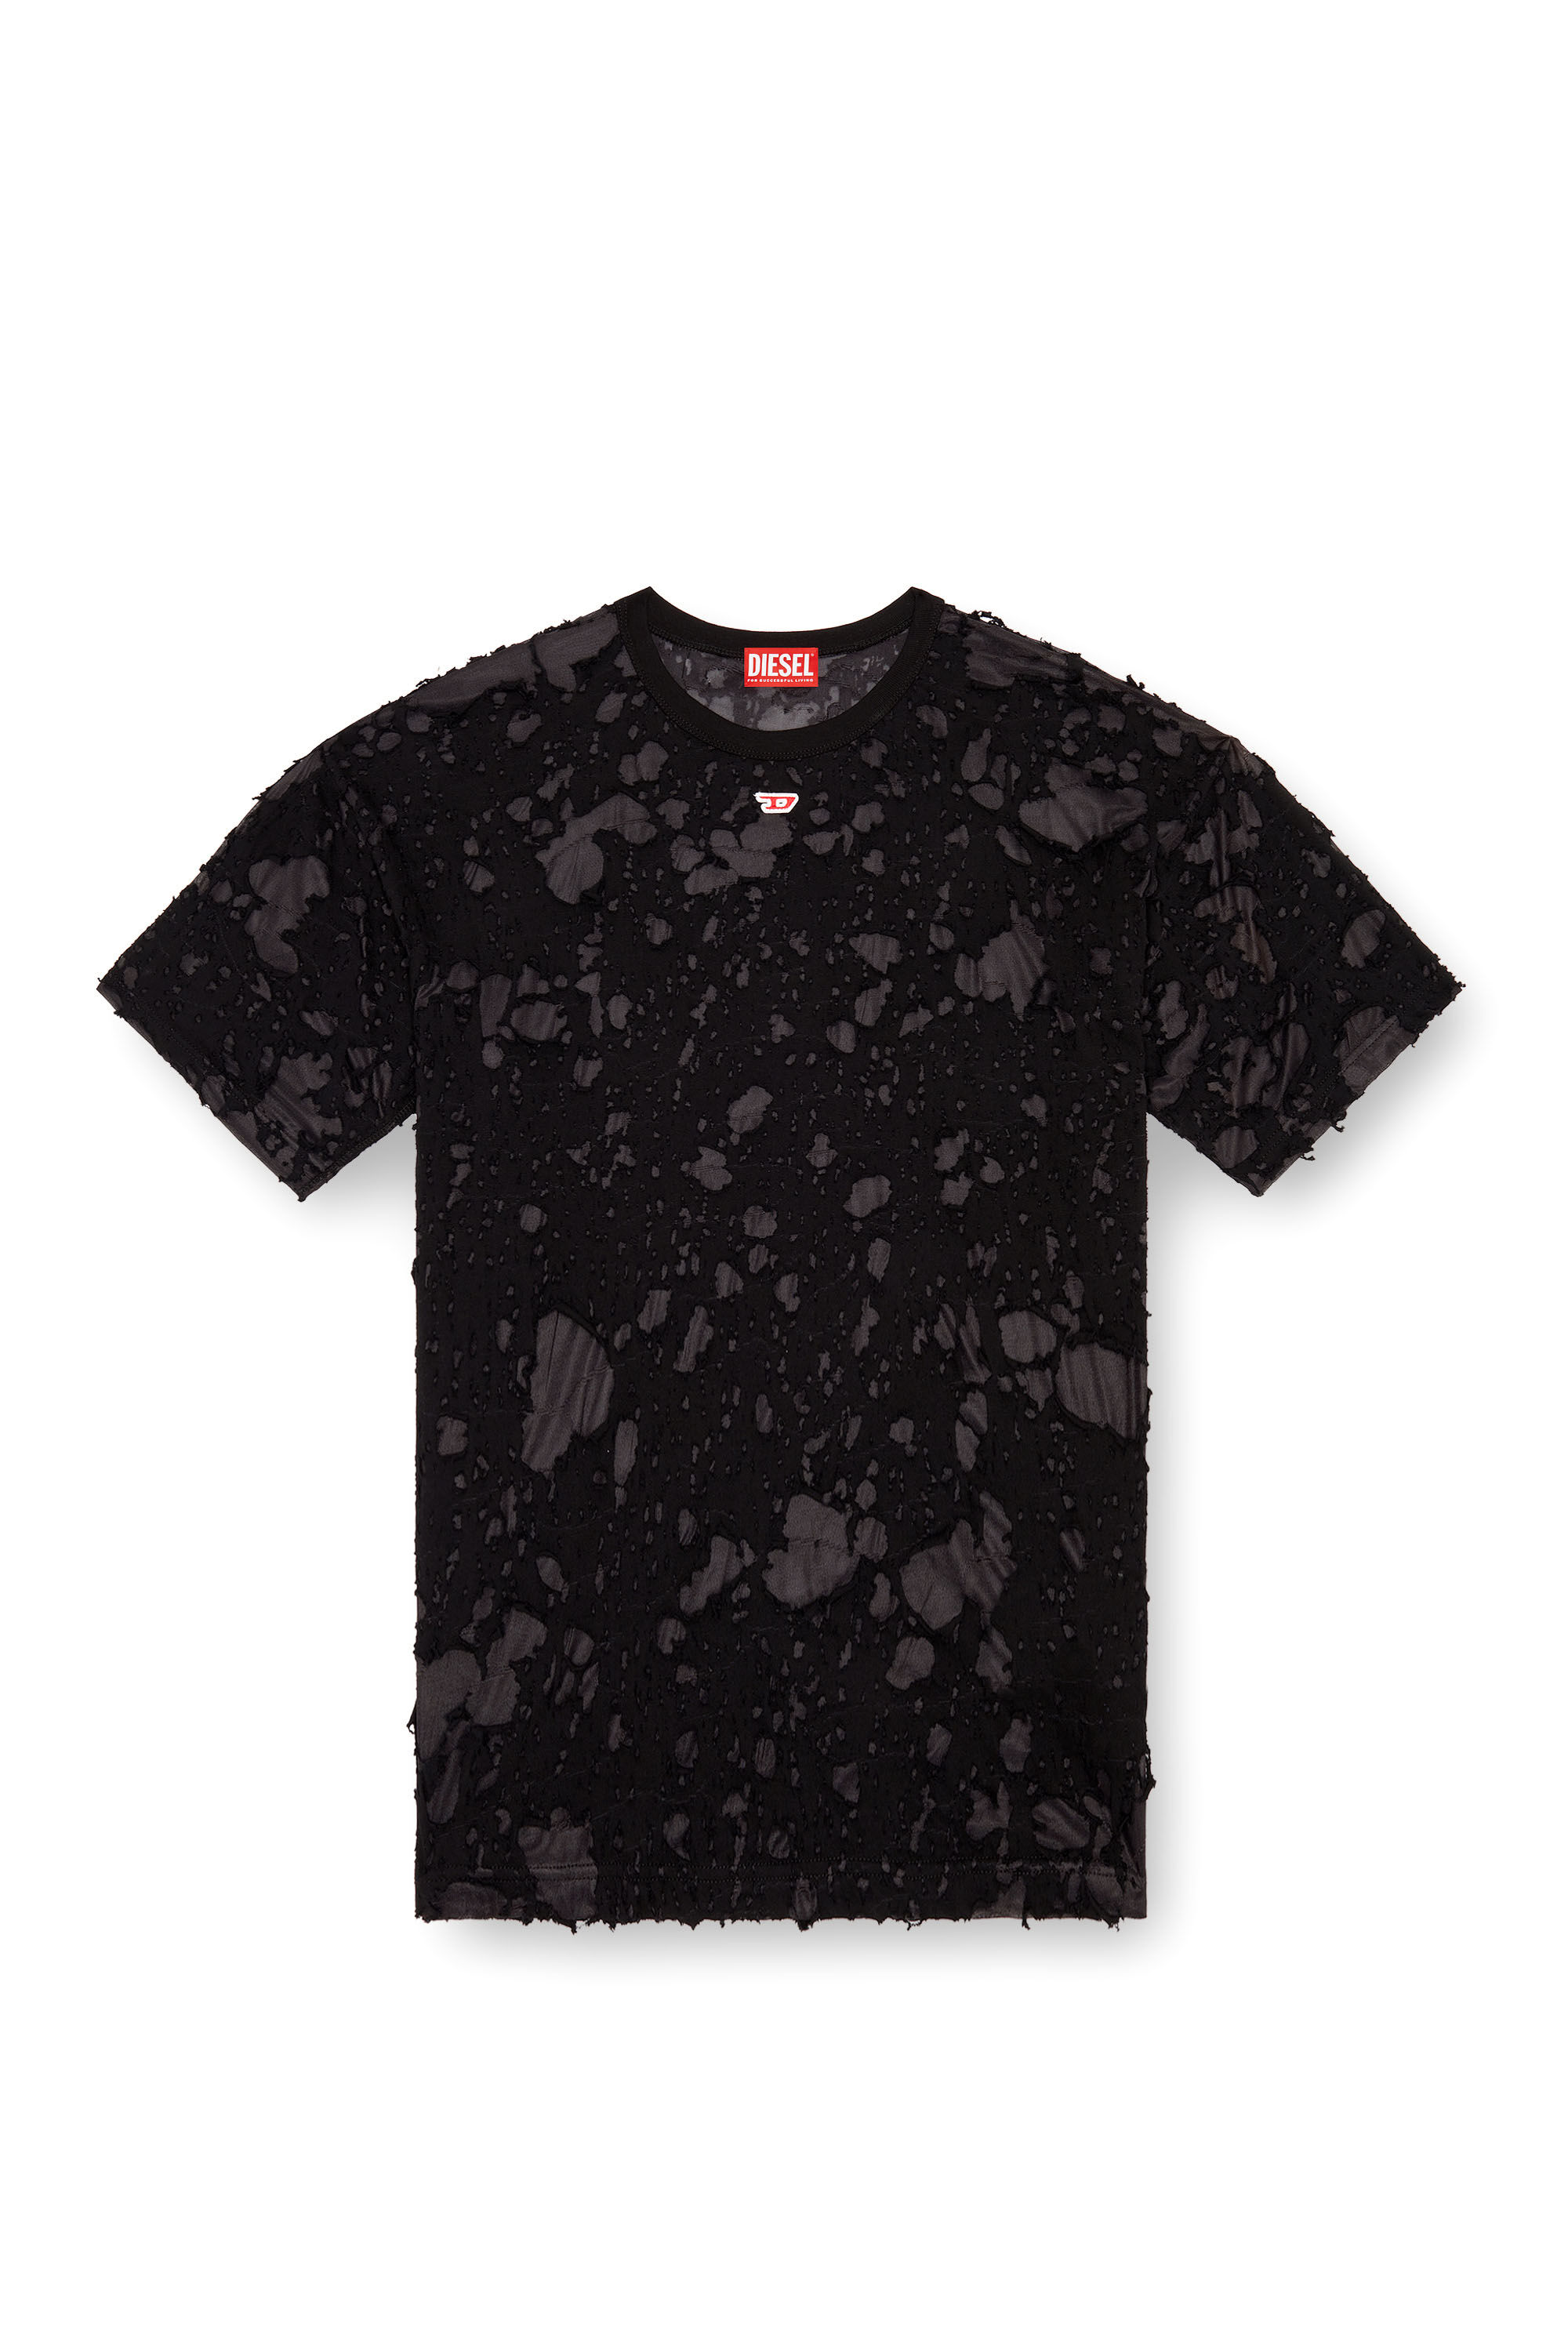 Diesel - T-BOXT-Q3, Male Layered T-shirt with burn-out finish in ブラック - Image 2